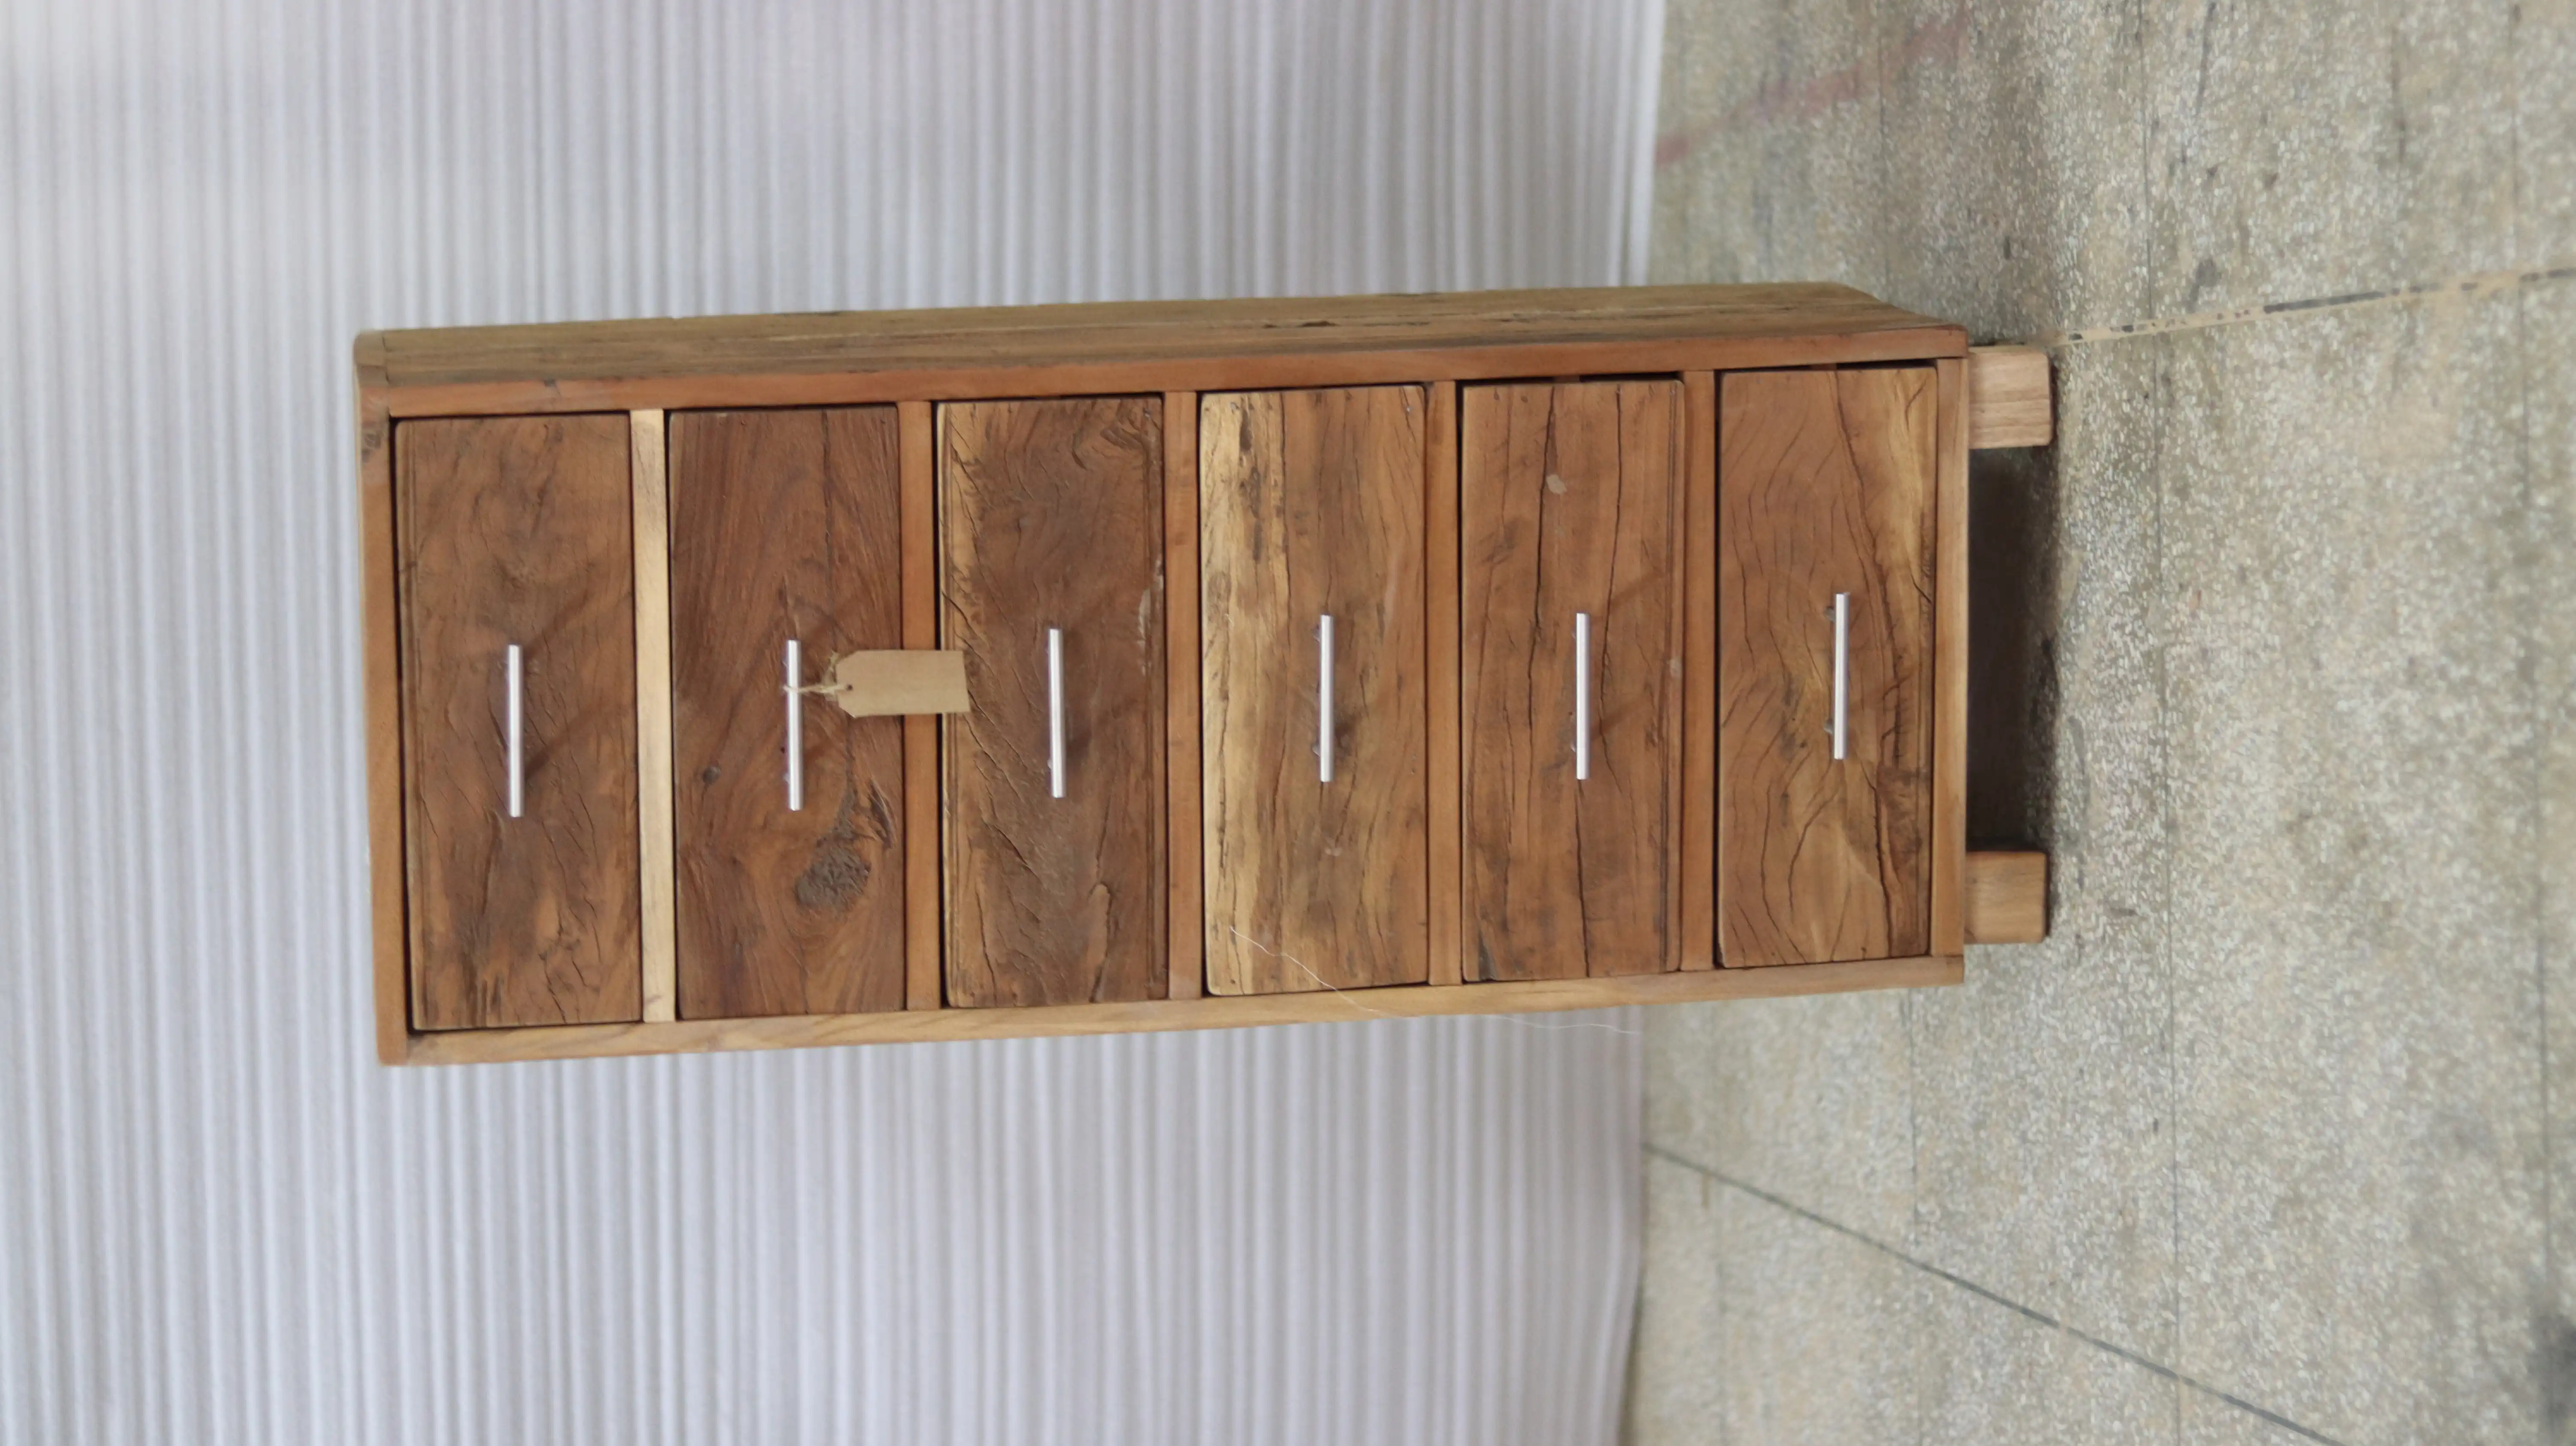 Reclaimed Wood Drawer Chest with 6 Drawers - popular handicrafts